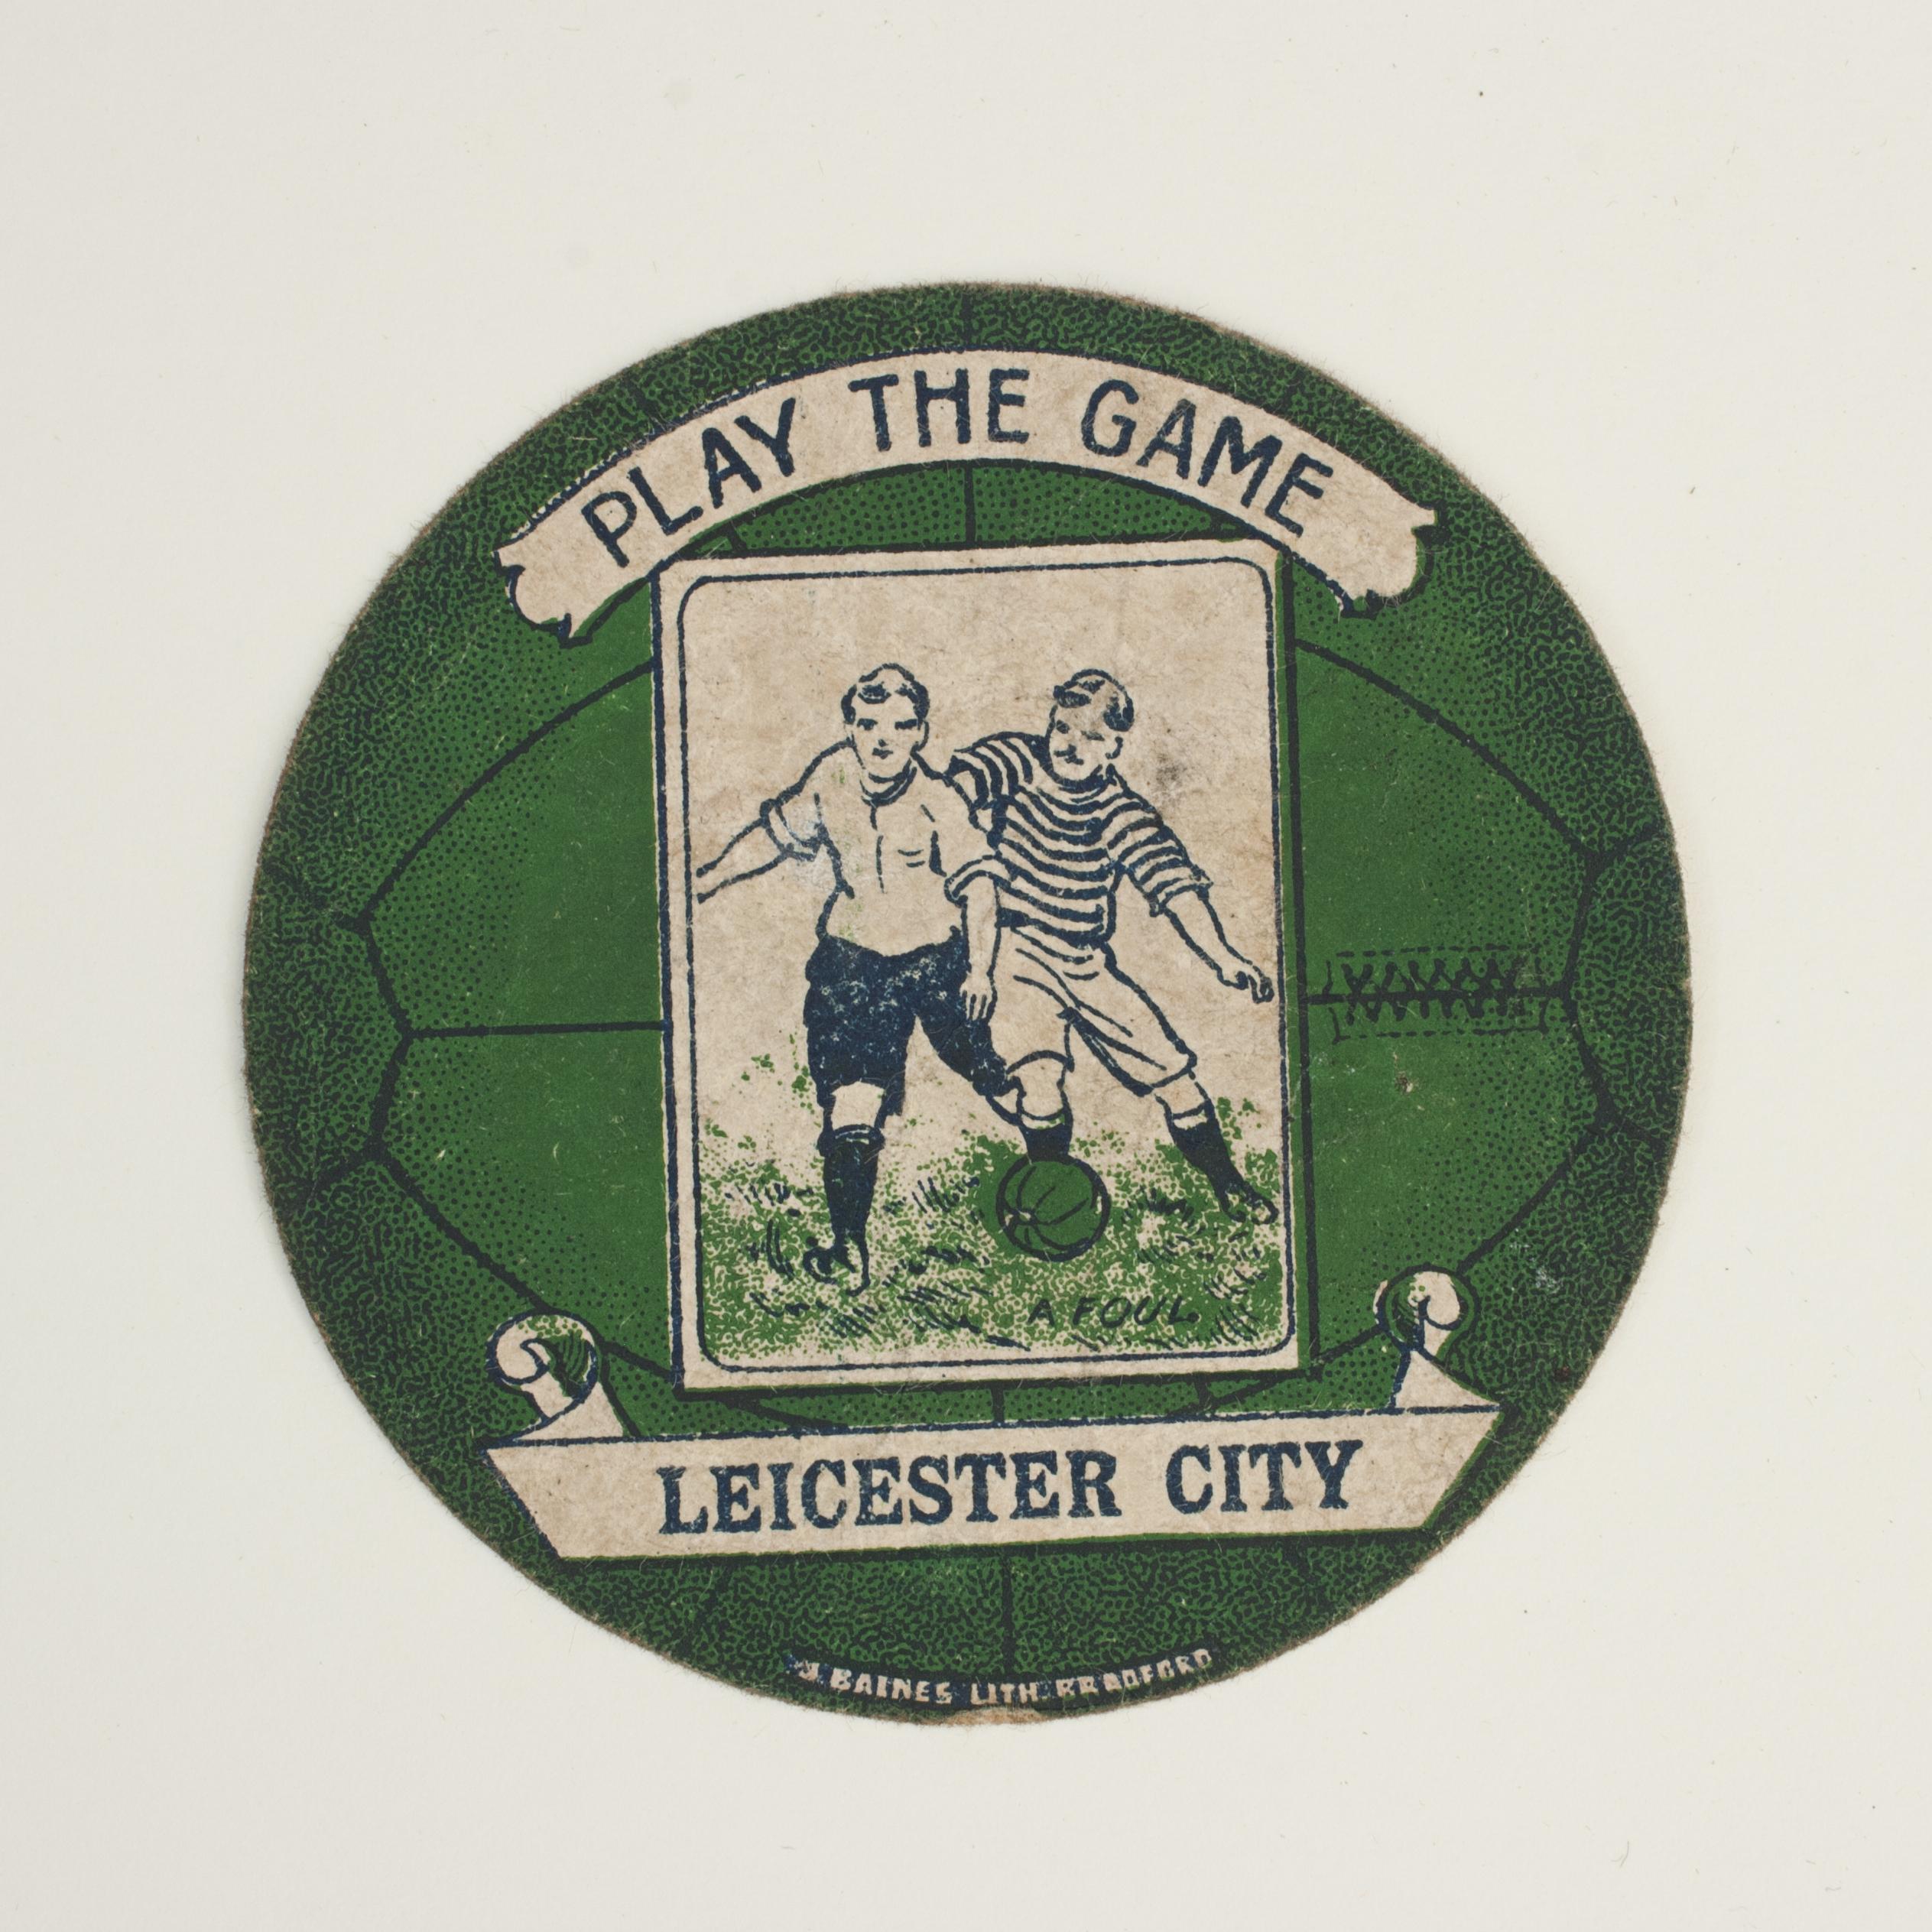 Sporting Art Baines Football Trade Card, Leicester City Play the Game For Sale